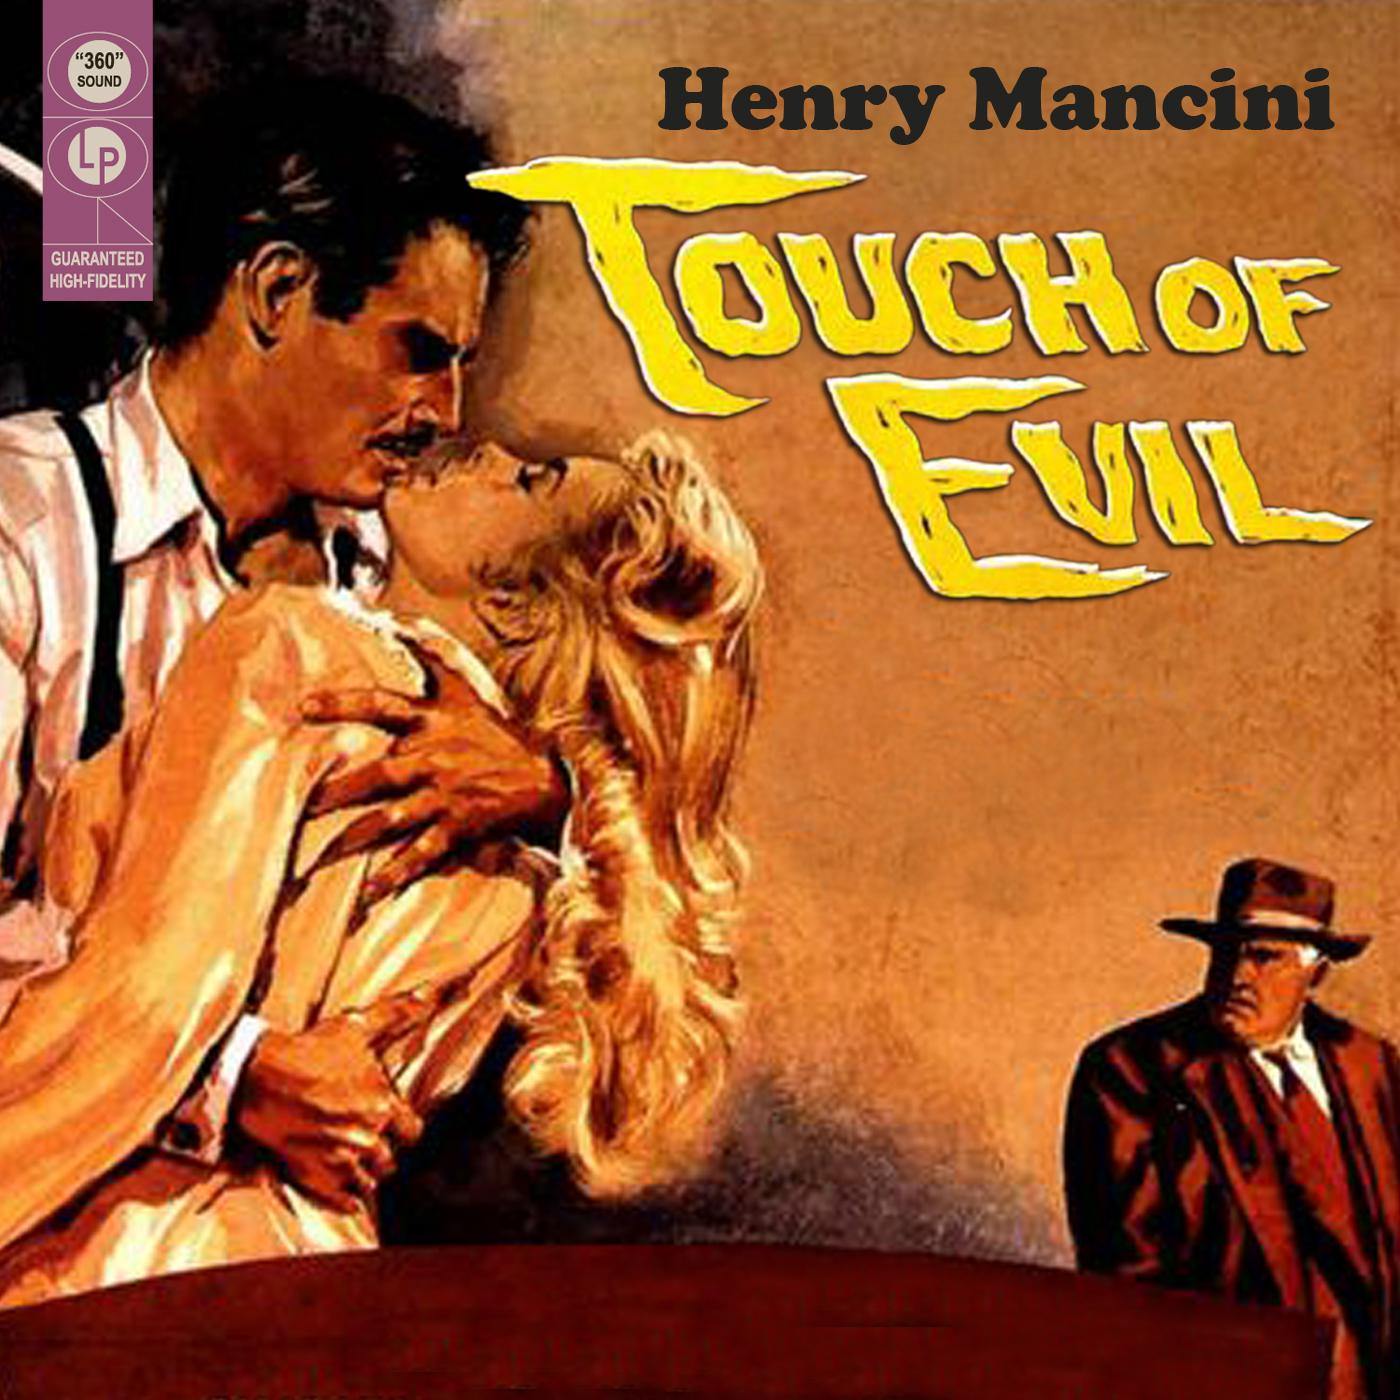 A Touch of Evil